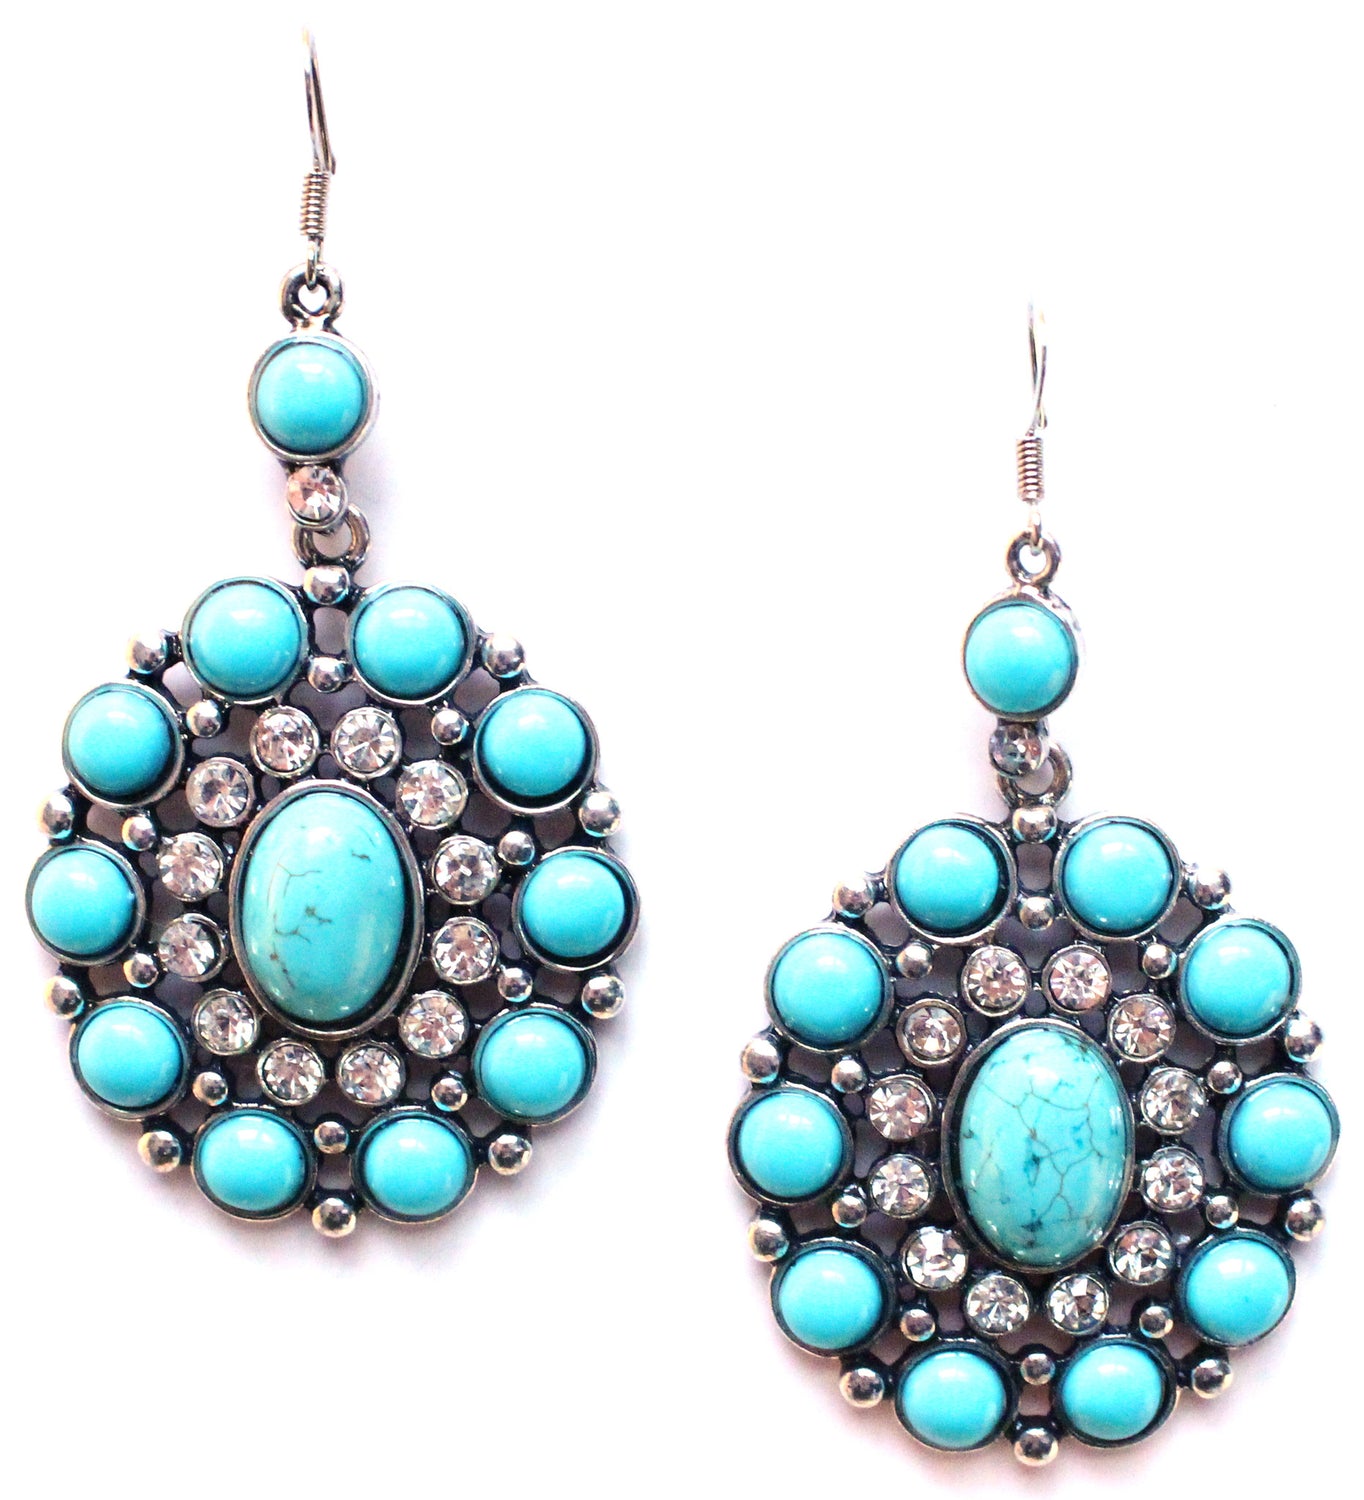 Southern Sparkle Turquoise Earrings